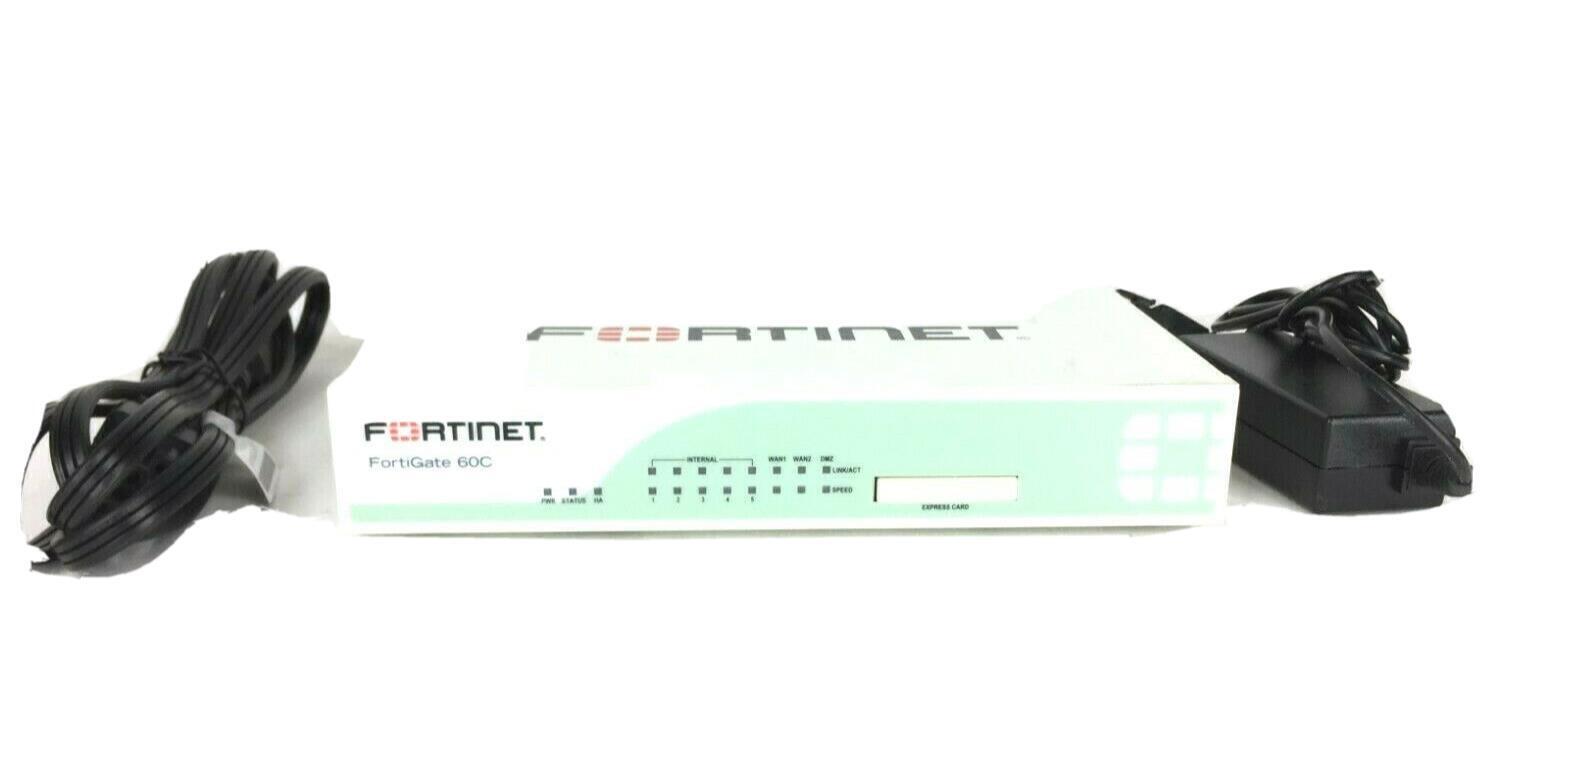 Fortinet Fortigate FG-60C Security Appliance Firewall with adapter 